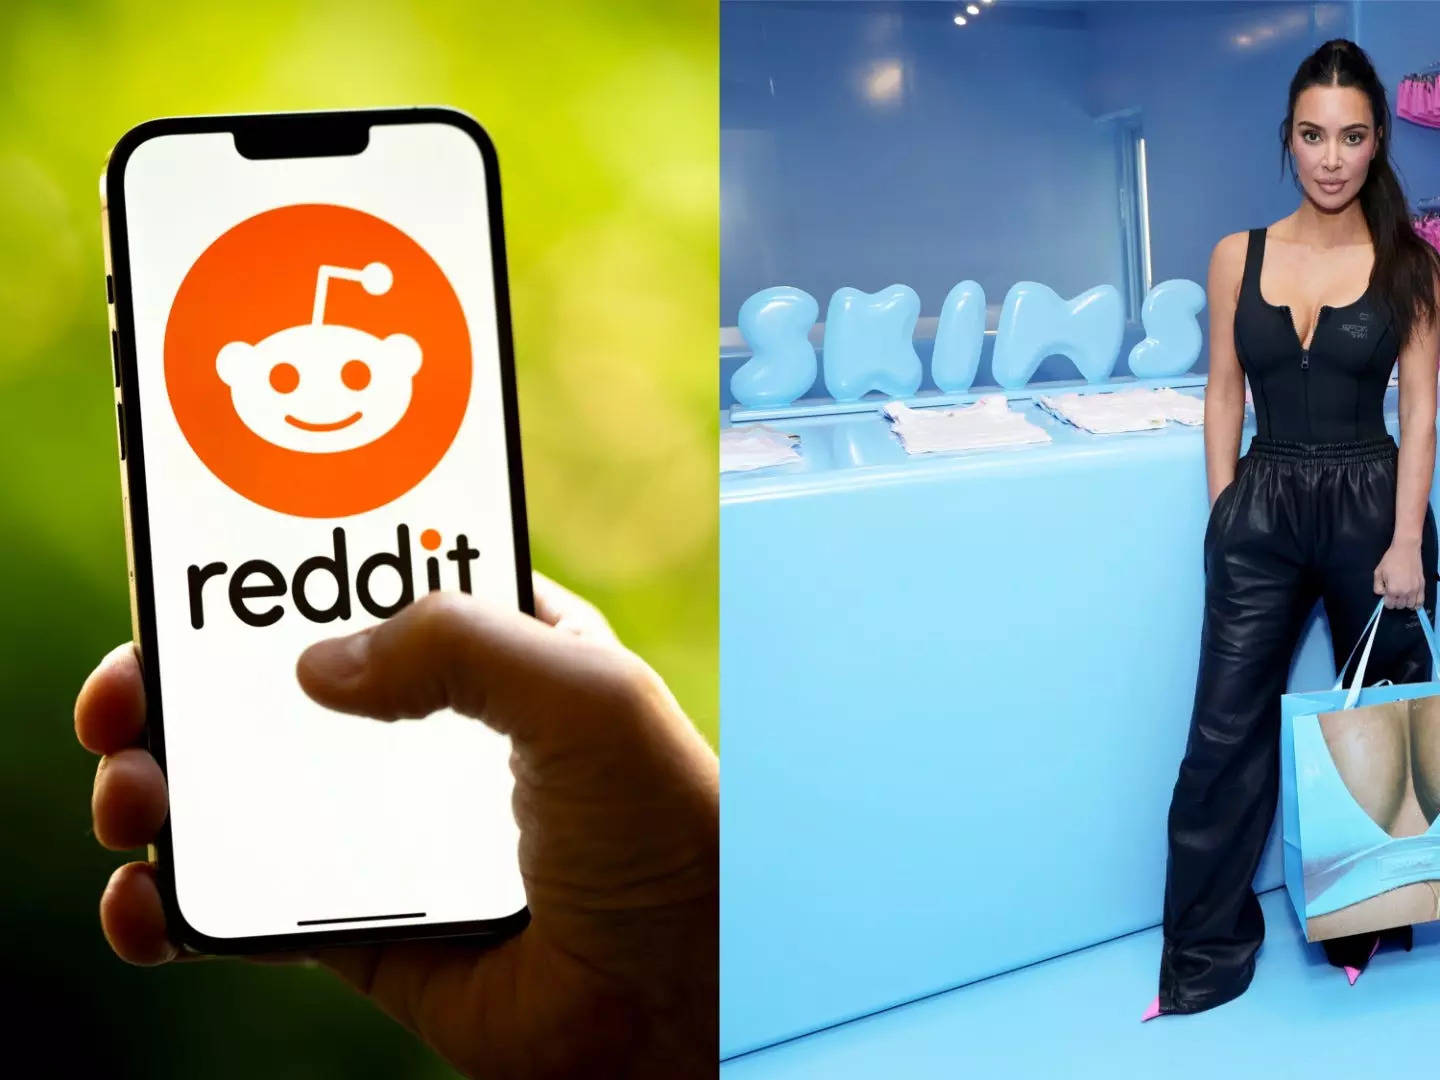 Reddit and Kim Kardashian's SKIMS are among the companies in talks to